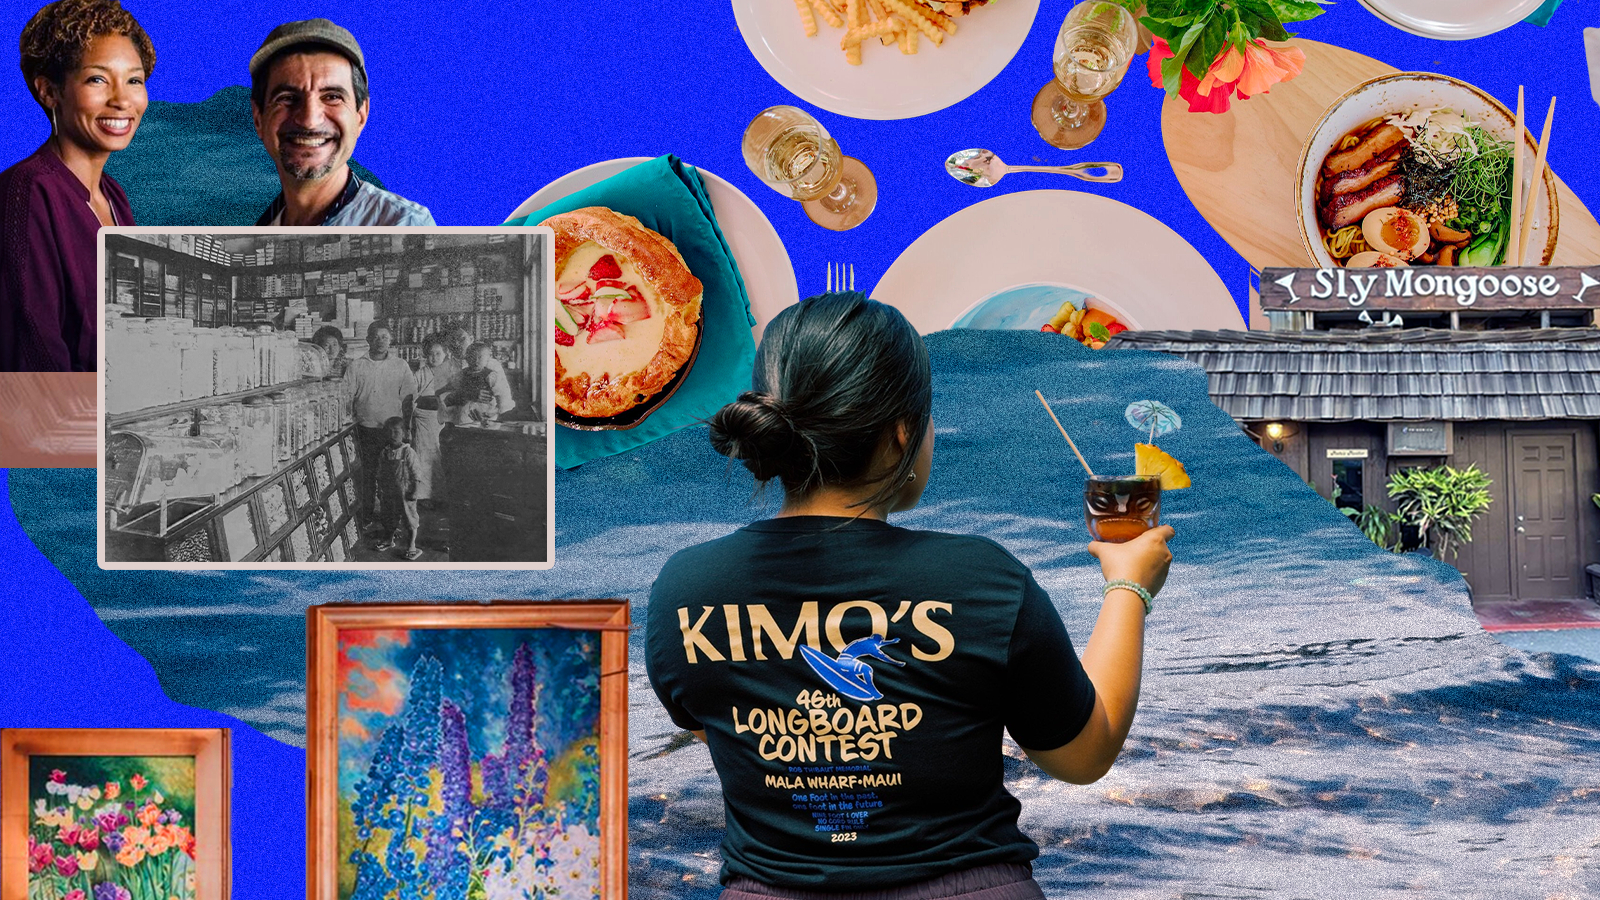 A collage of food, the ocean, the Sly Mongoose restaurant, a vintage photograph and people 